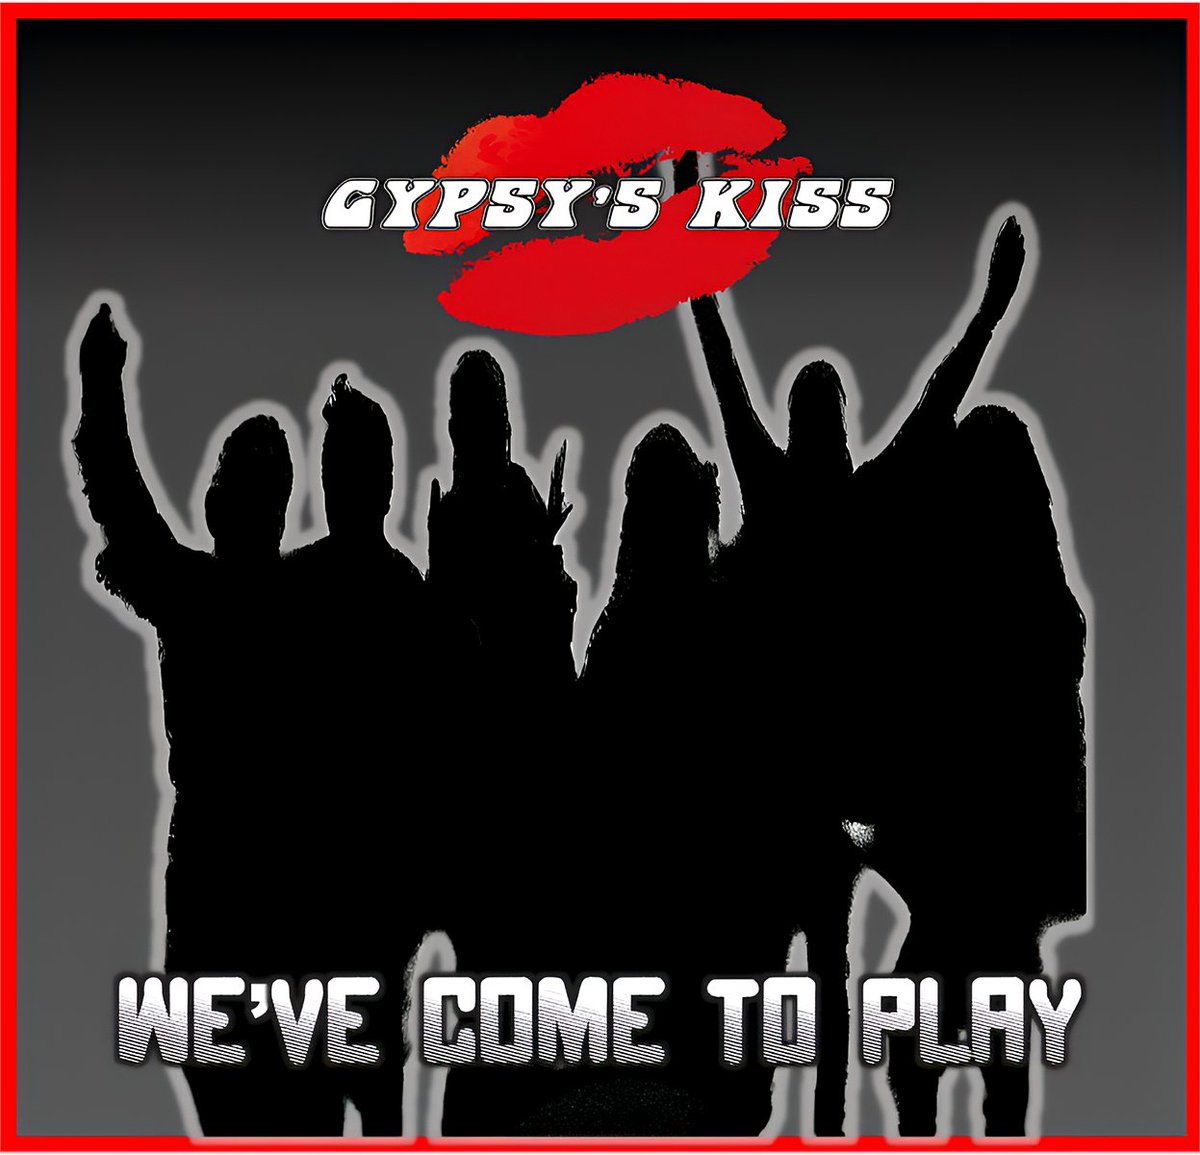 👊 NEW RELEASE! 👍 NEW RELEASE! 🤘

🇬🇧 Gypsy's Kiss - 🎶We've Come to Play

Listen on
📻 CLICKYOURRADIO.COM - ROCK & BLUES
🔊 tinyurl.com/CYRClrBl
📲 tinyurl.com/RLCYRClRBl

#ironmaidenfans #ironmaiden #steveharris #classicrock #classicrock